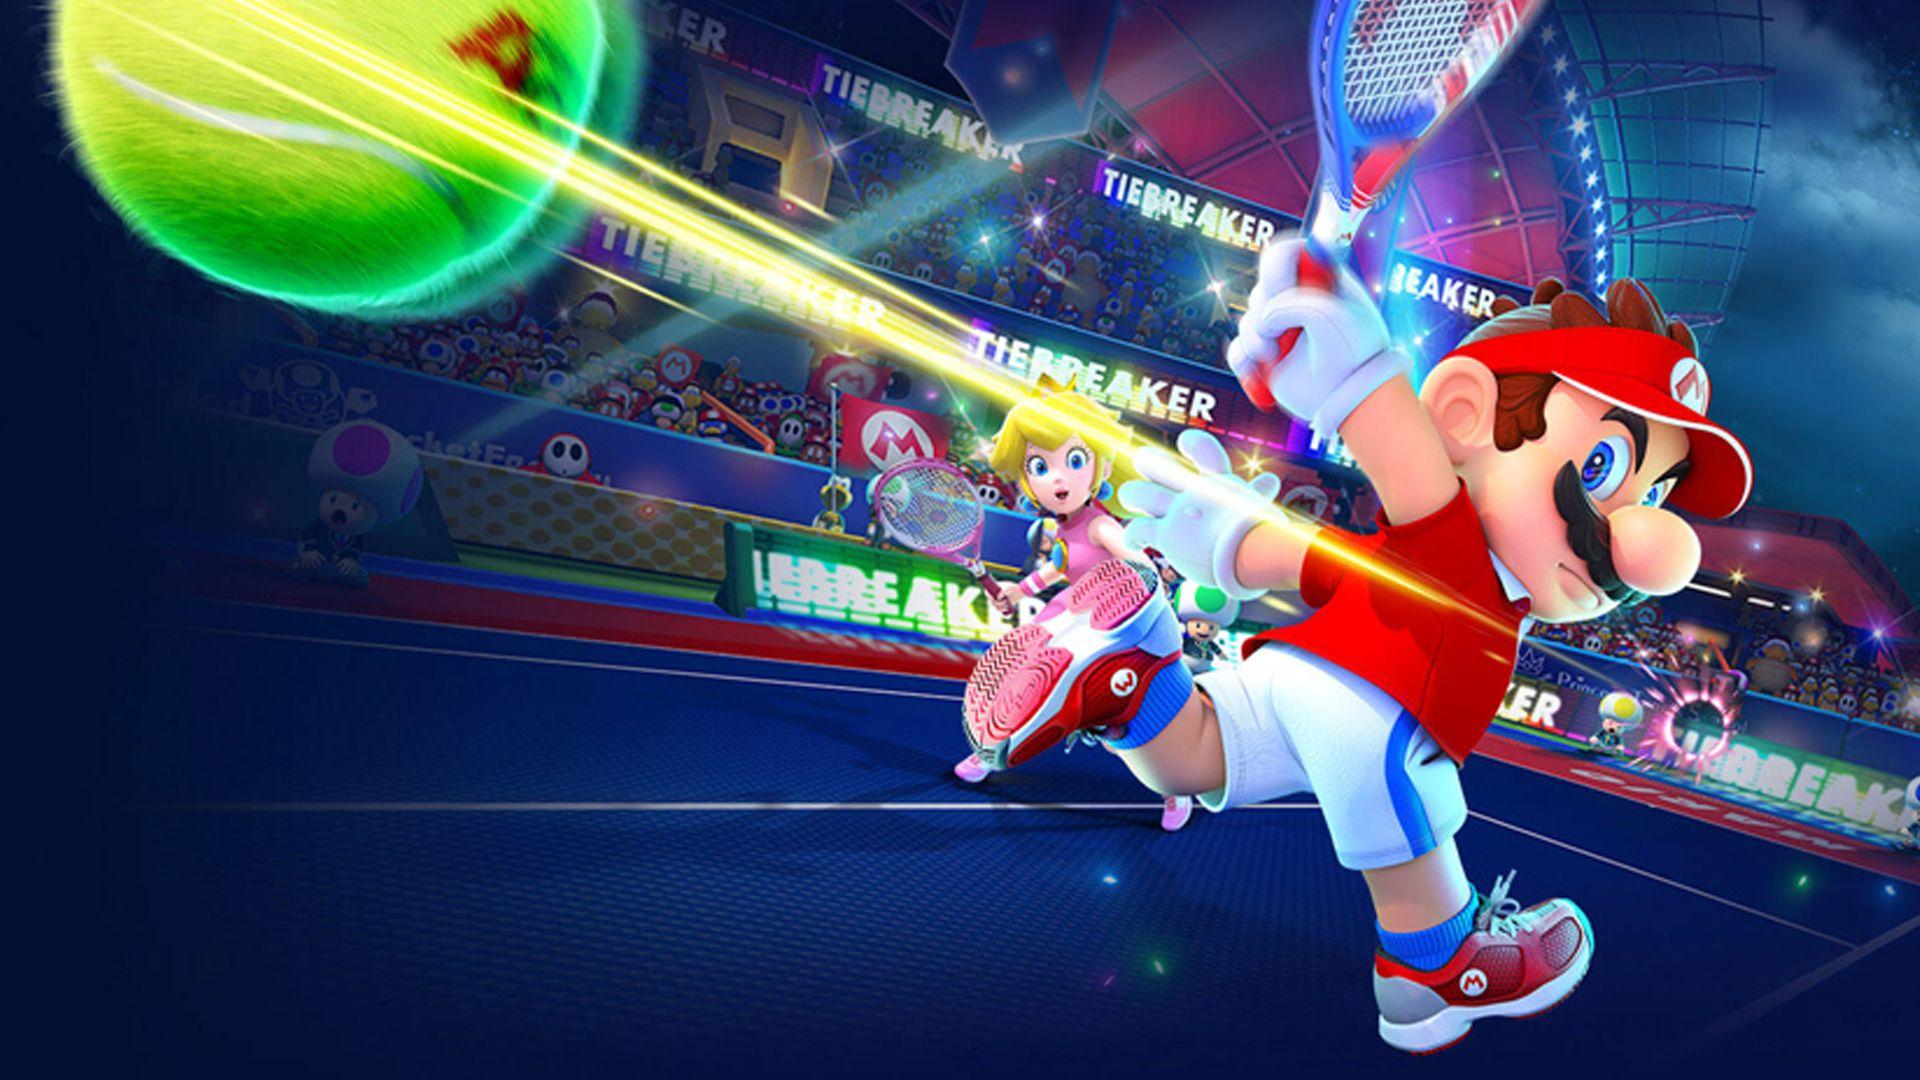 Nintendo Serves Up One Of Its Top Sports Games With Mario Tennis